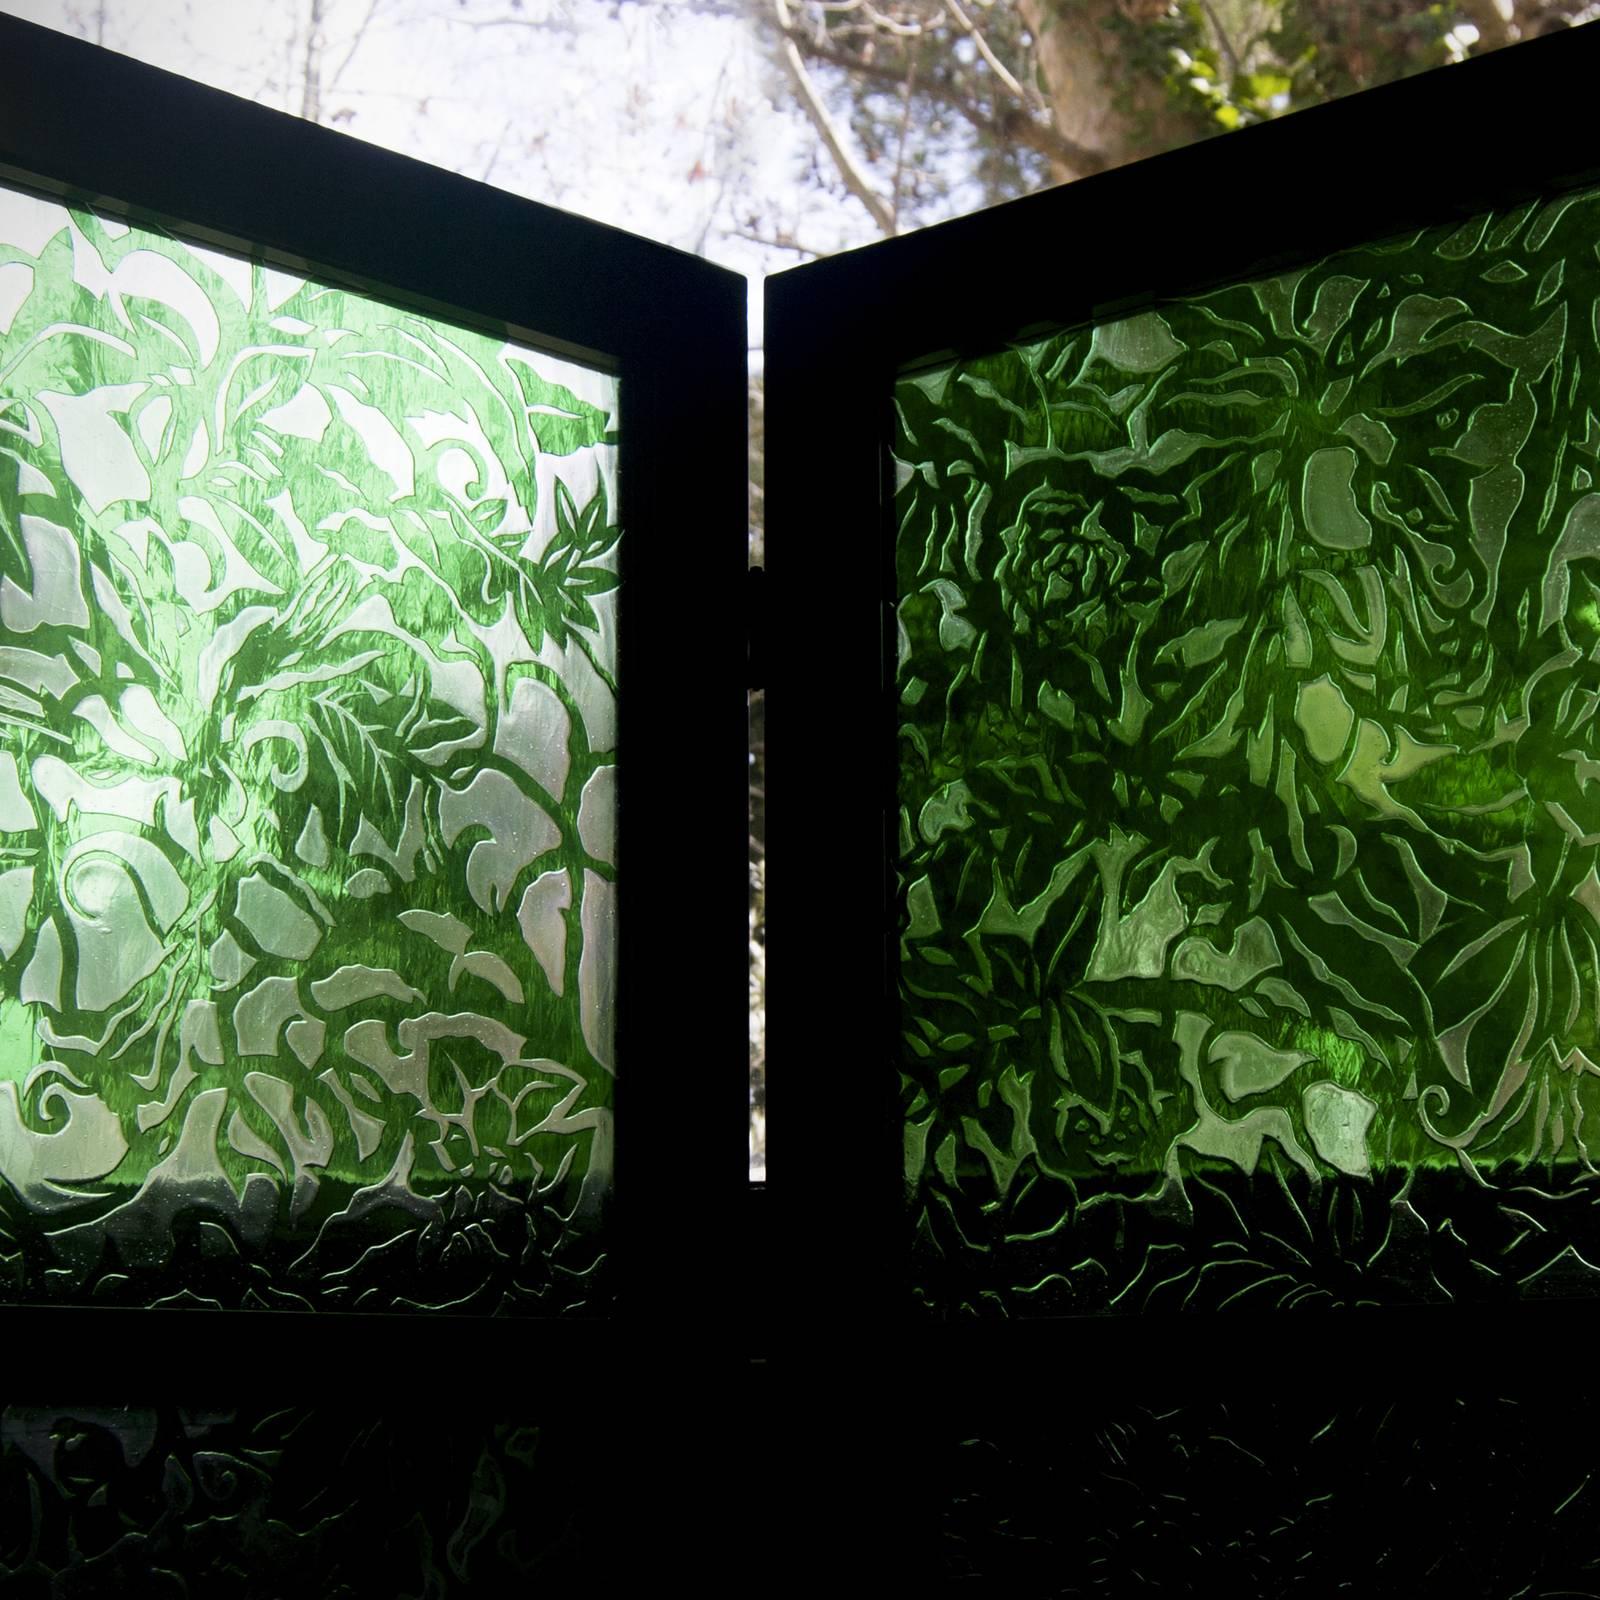 Stunning in its simplicity, this screen is a sophisticated reinterpretation of vintage screens. The wooden frame in black Chinese lacquer supports the distinctive mouth-blown glass panels created by layering clear and green glass. The verdant frond